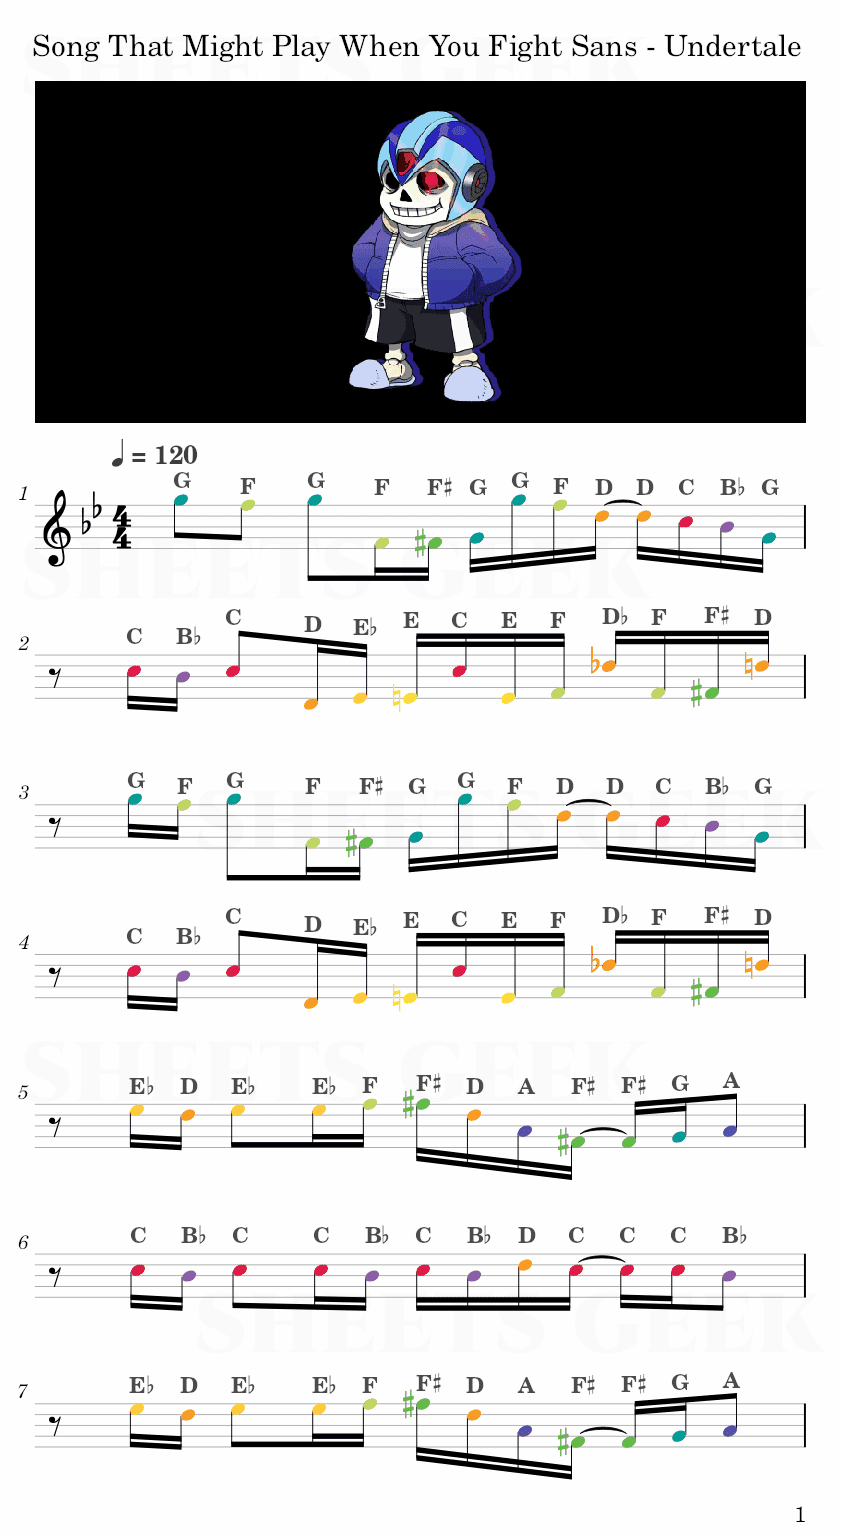 Song That Might Play When You Fight Sans - Undertale Easy Sheet Music Free for piano, keyboard, flute, violin, sax, cello page 1